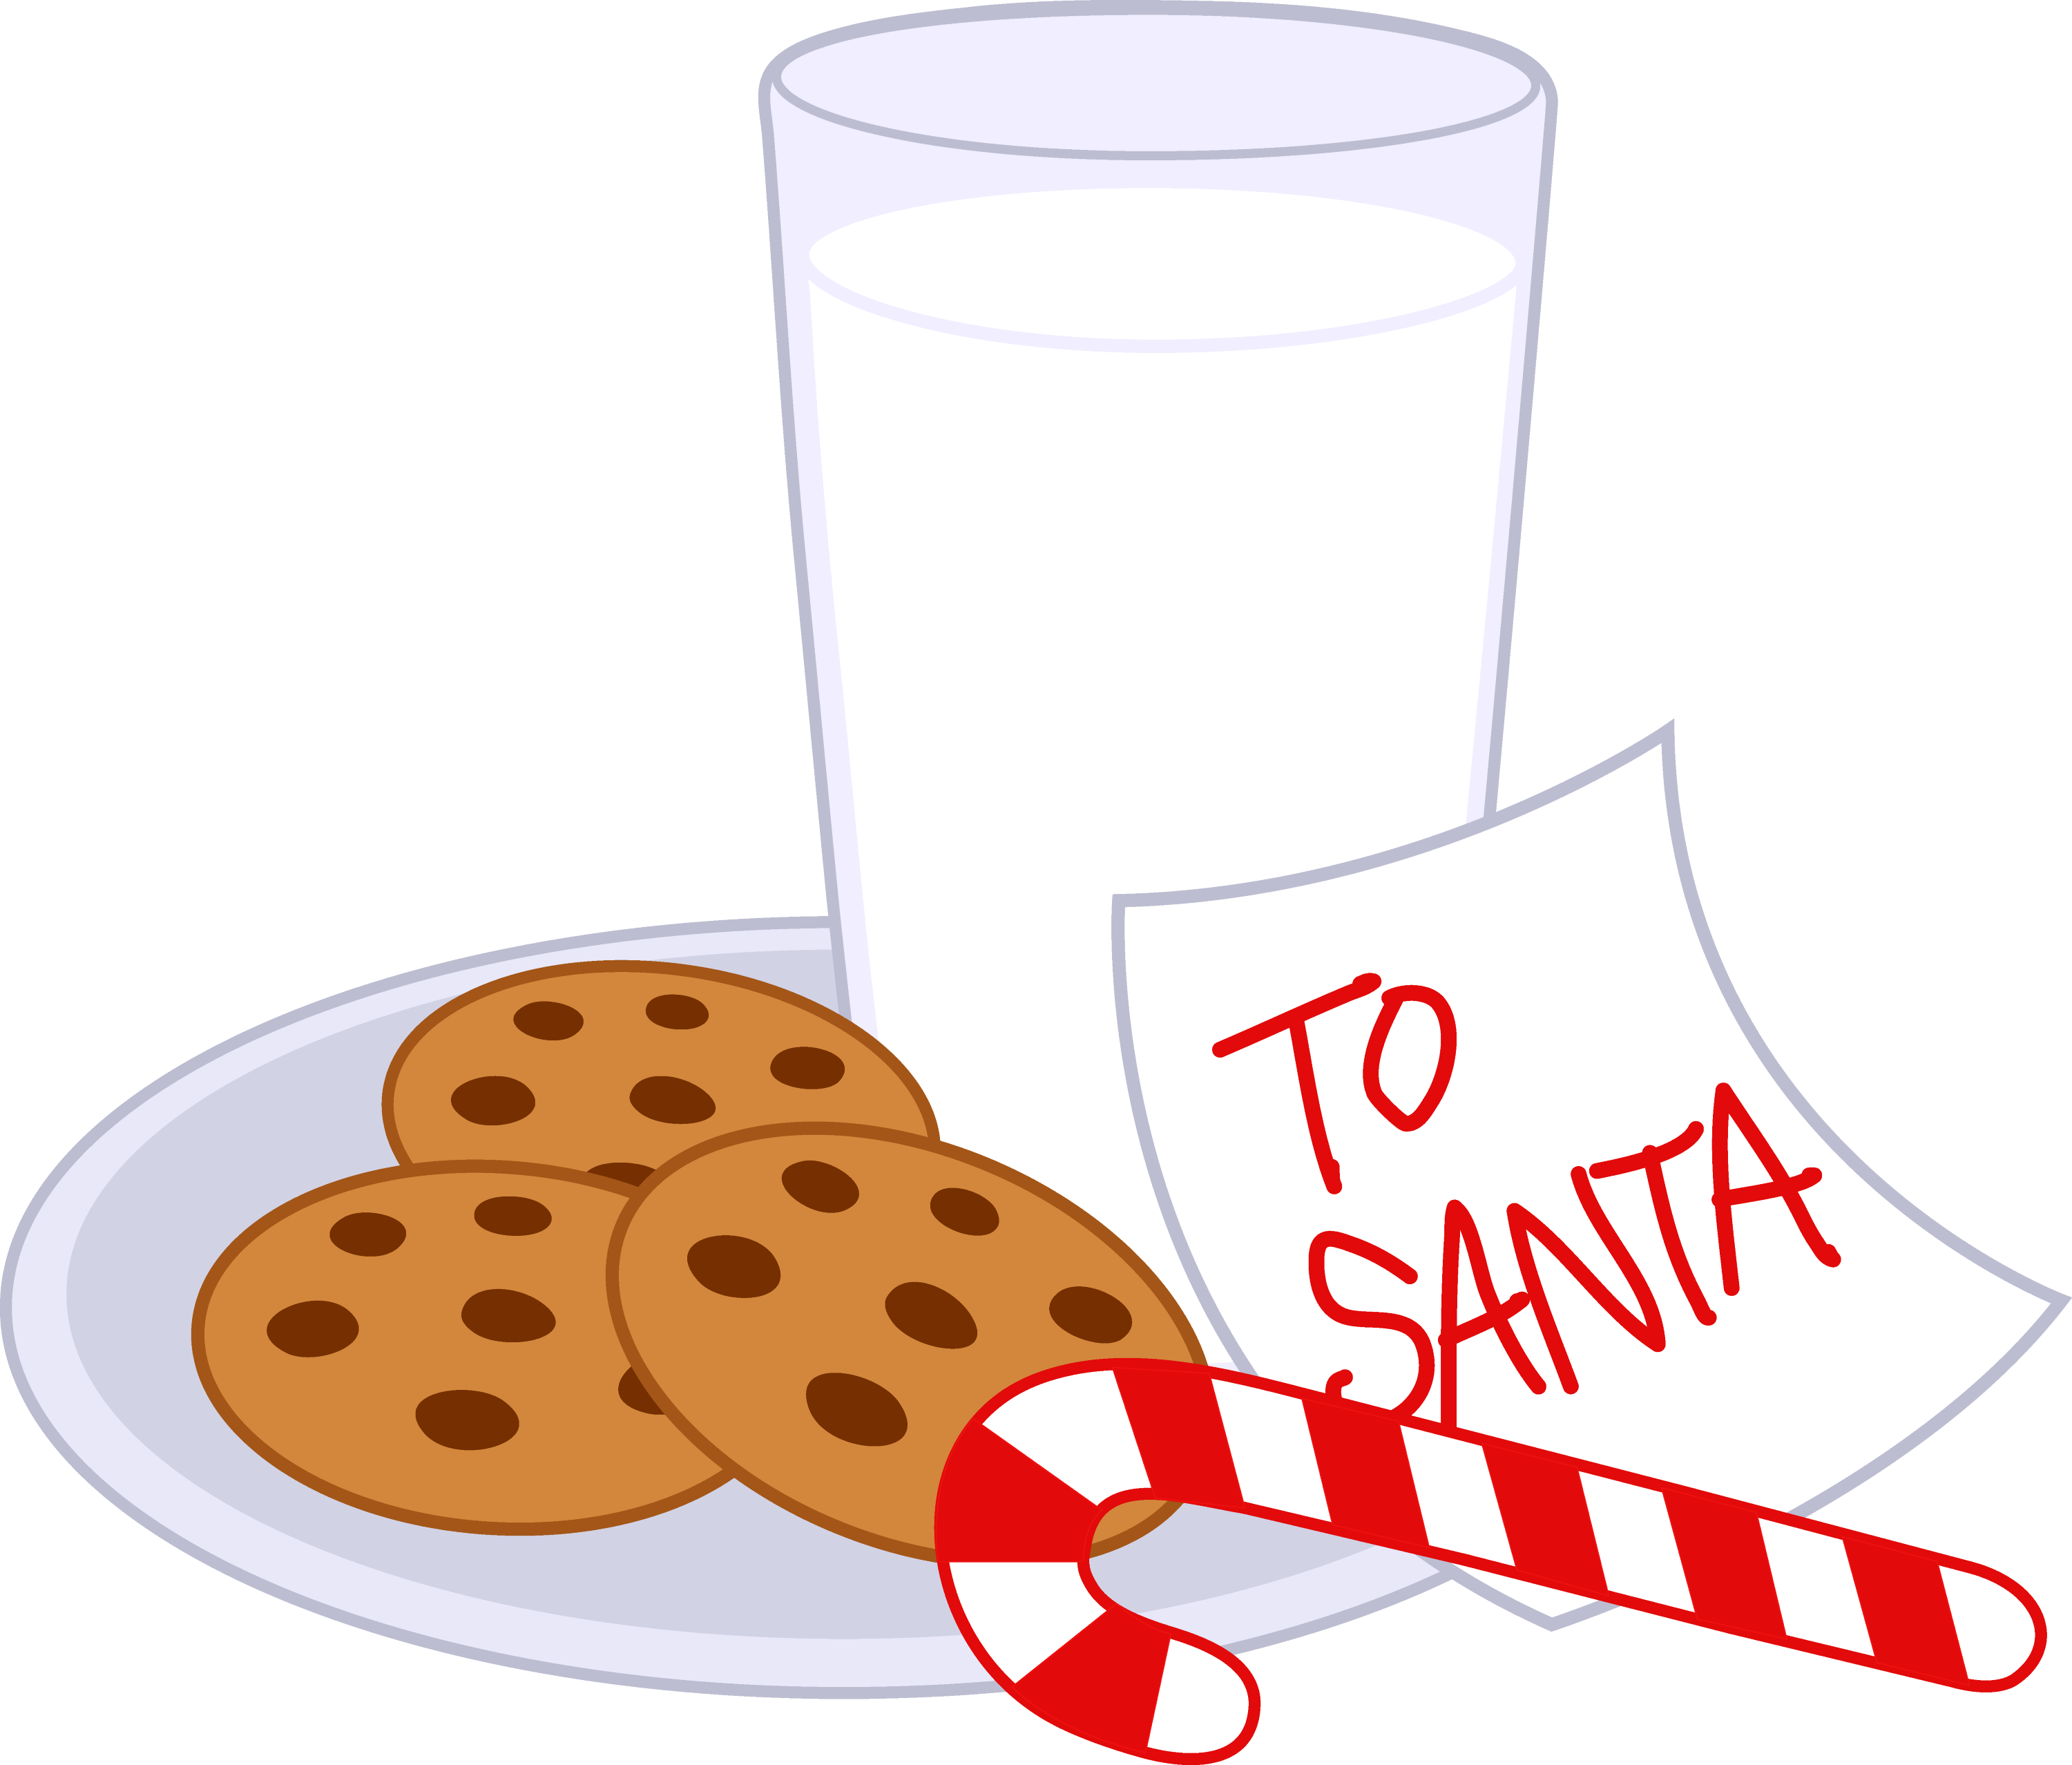 Cookies And Milk For Santa Claus Free Clip Art